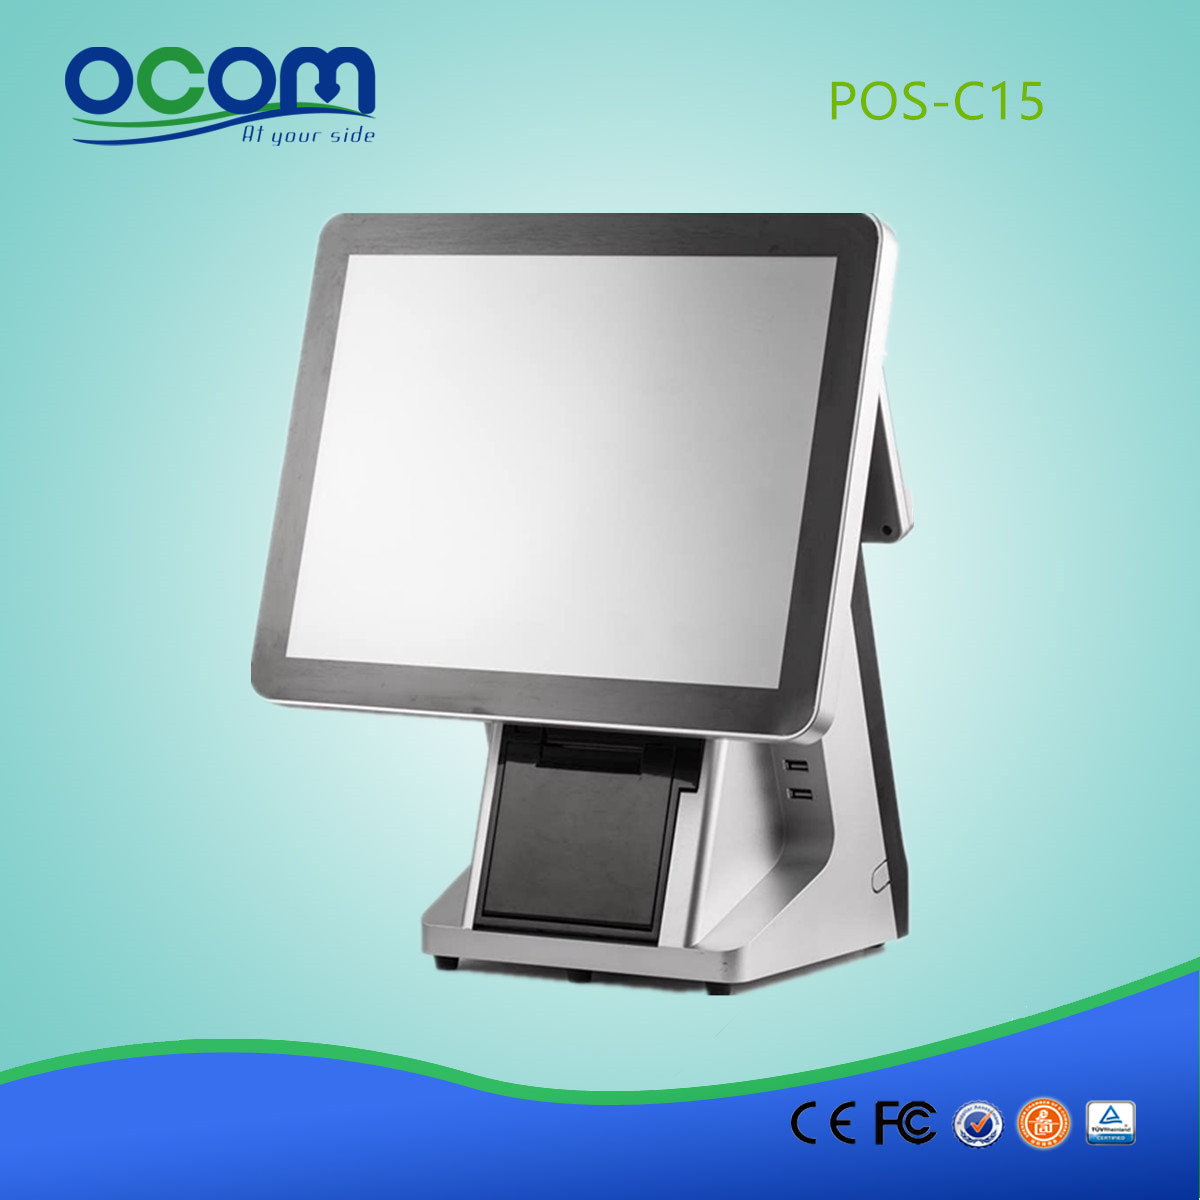 POS-C15-Cina fabbrica fatta J1900 32G SSD all in one 15inch touch pos terminal